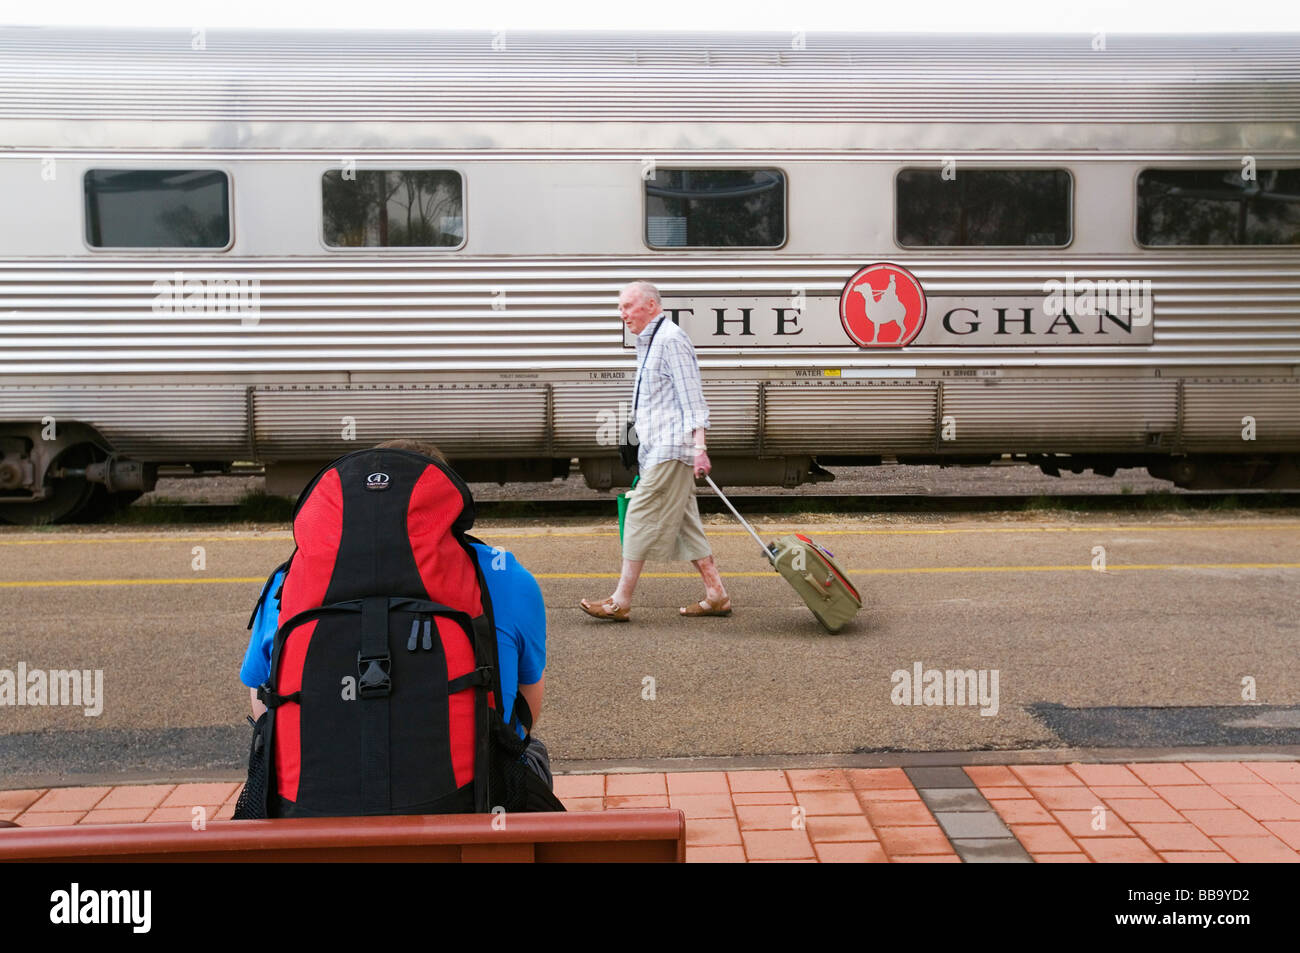 Passagiere an Bord The Ghan Alice Springs Station.  Alice Springs, Northern Territory, Australien Stockfoto